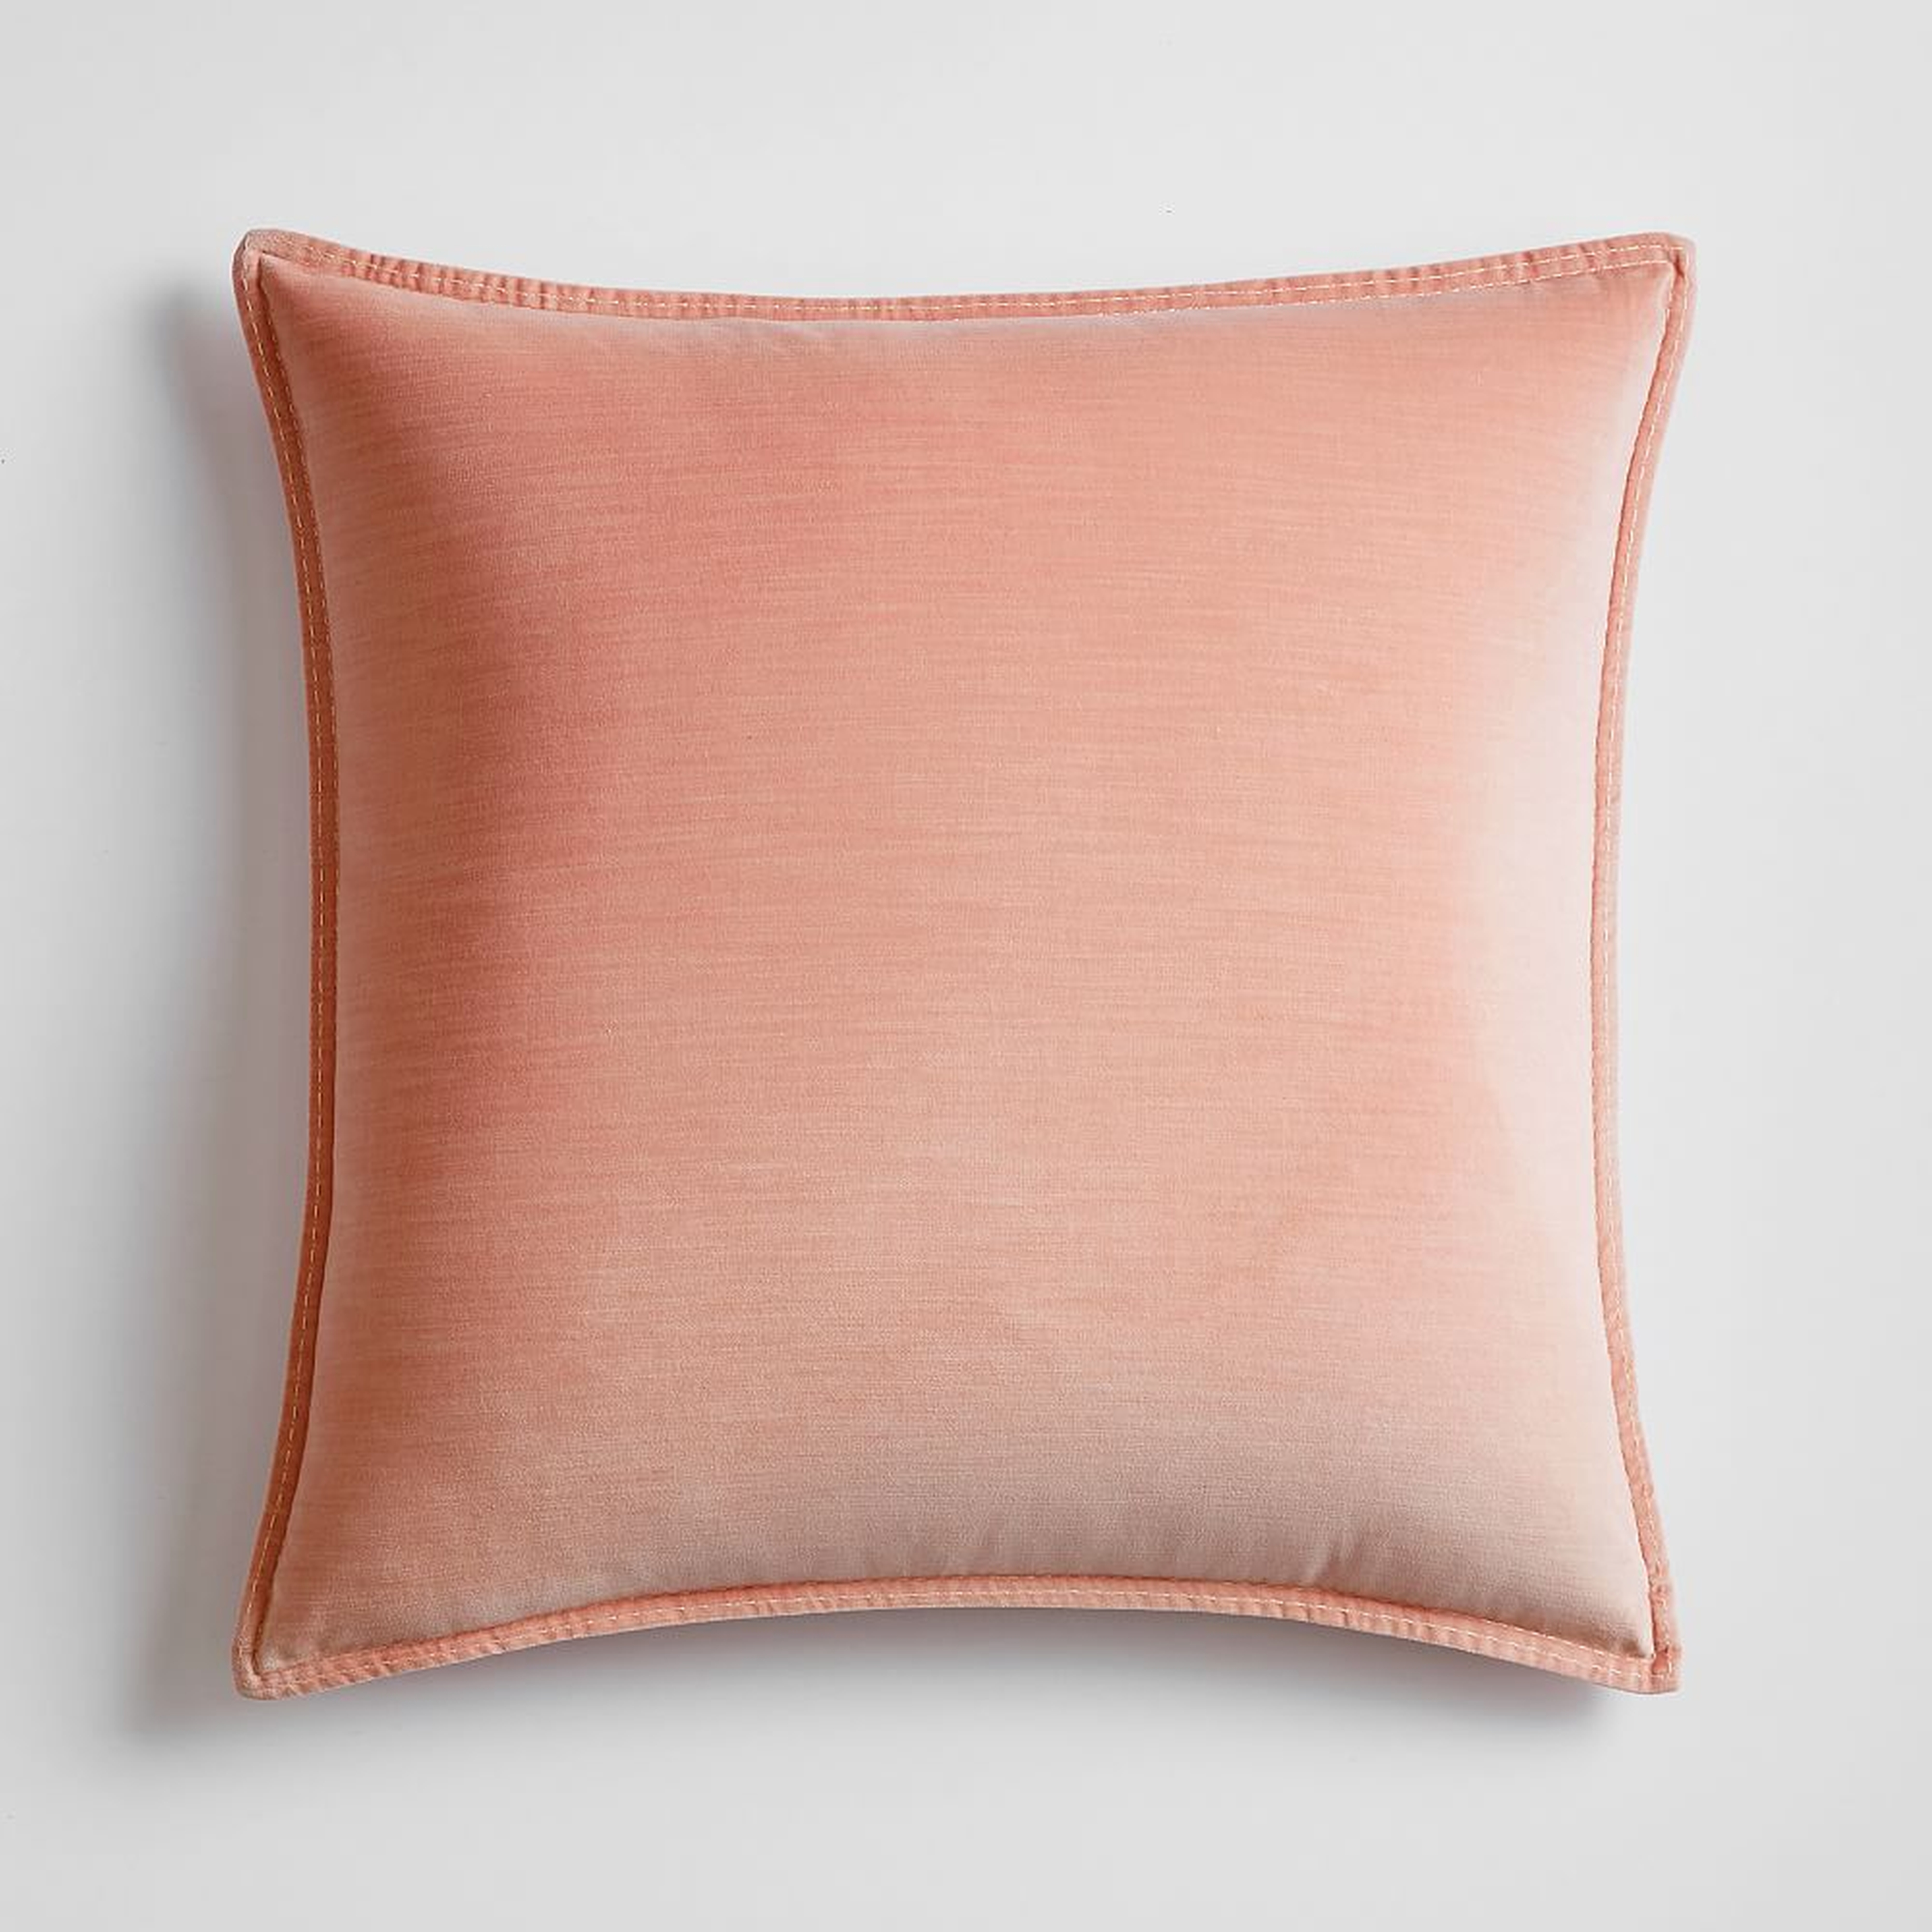 WE x pbdorm Washed Cotton Velvet Euro Pillow Cover, 26x26, Dusty Rose - Pottery Barn Teen